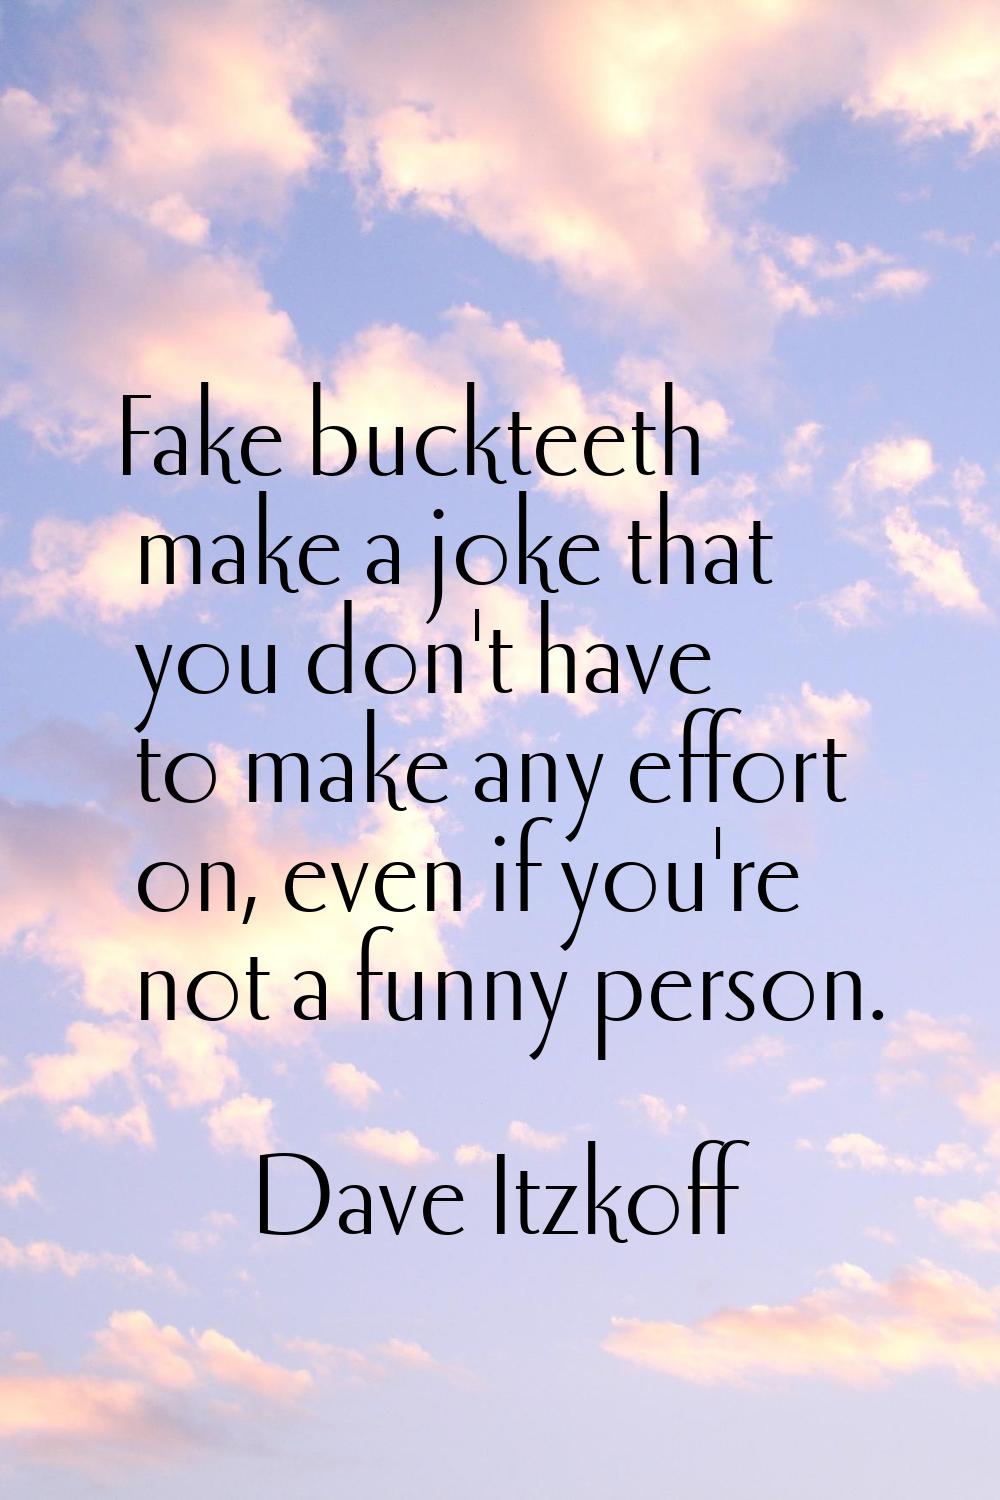 Fake buckteeth make a joke that you don't have to make any effort on, even if you're not a funny pe